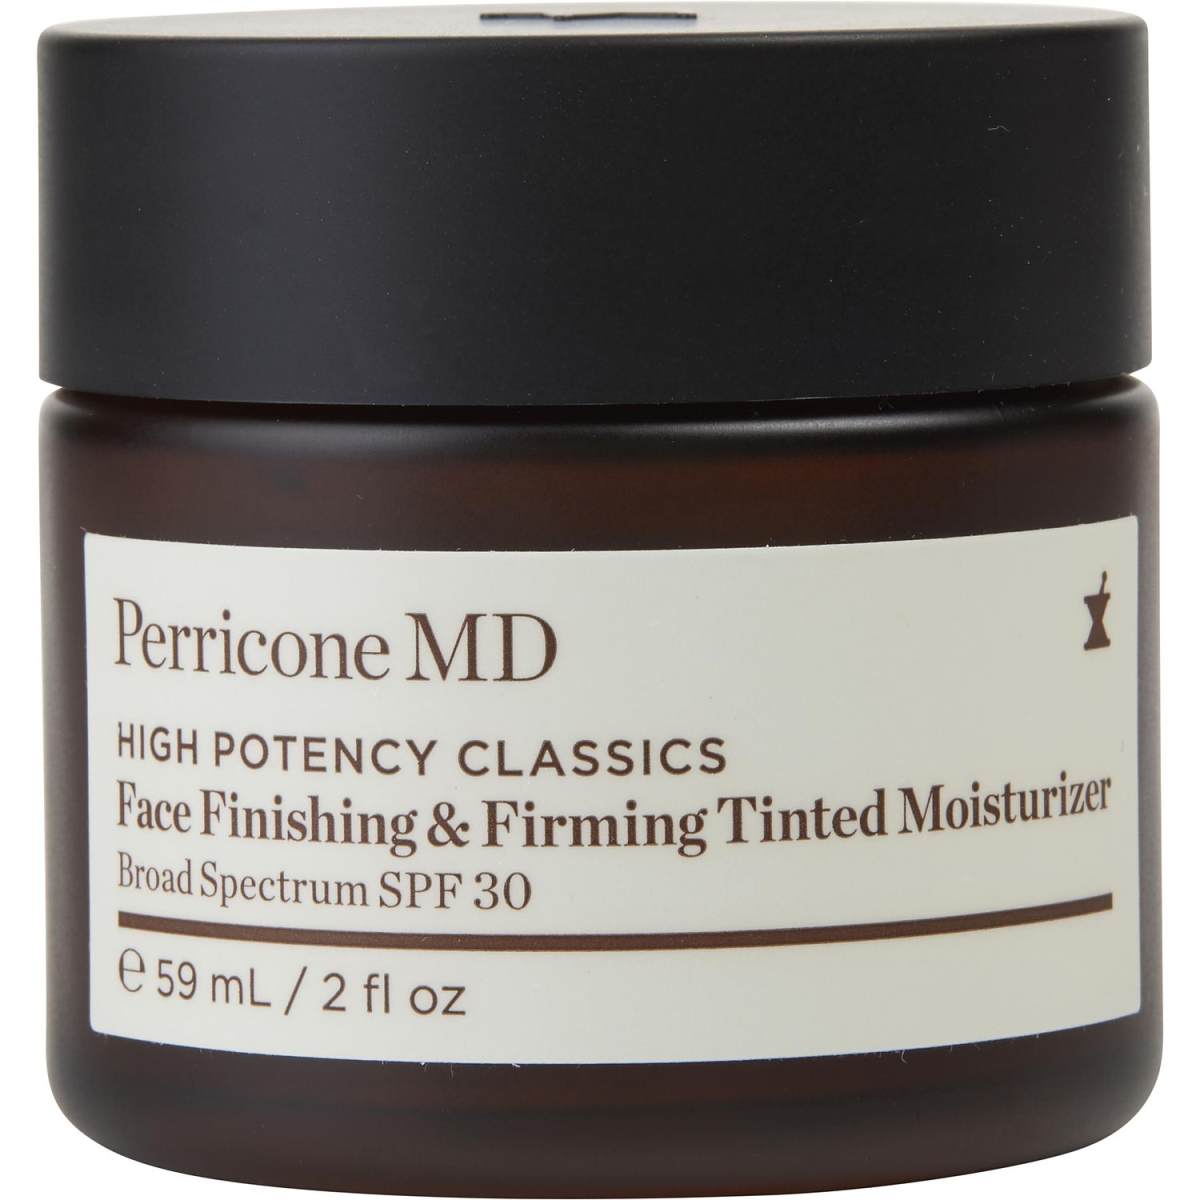 338534 2 oz Women High Potency Classics Face Finishing & Firming Tinted Moisturizer - SPF 30 -  Perricone Md